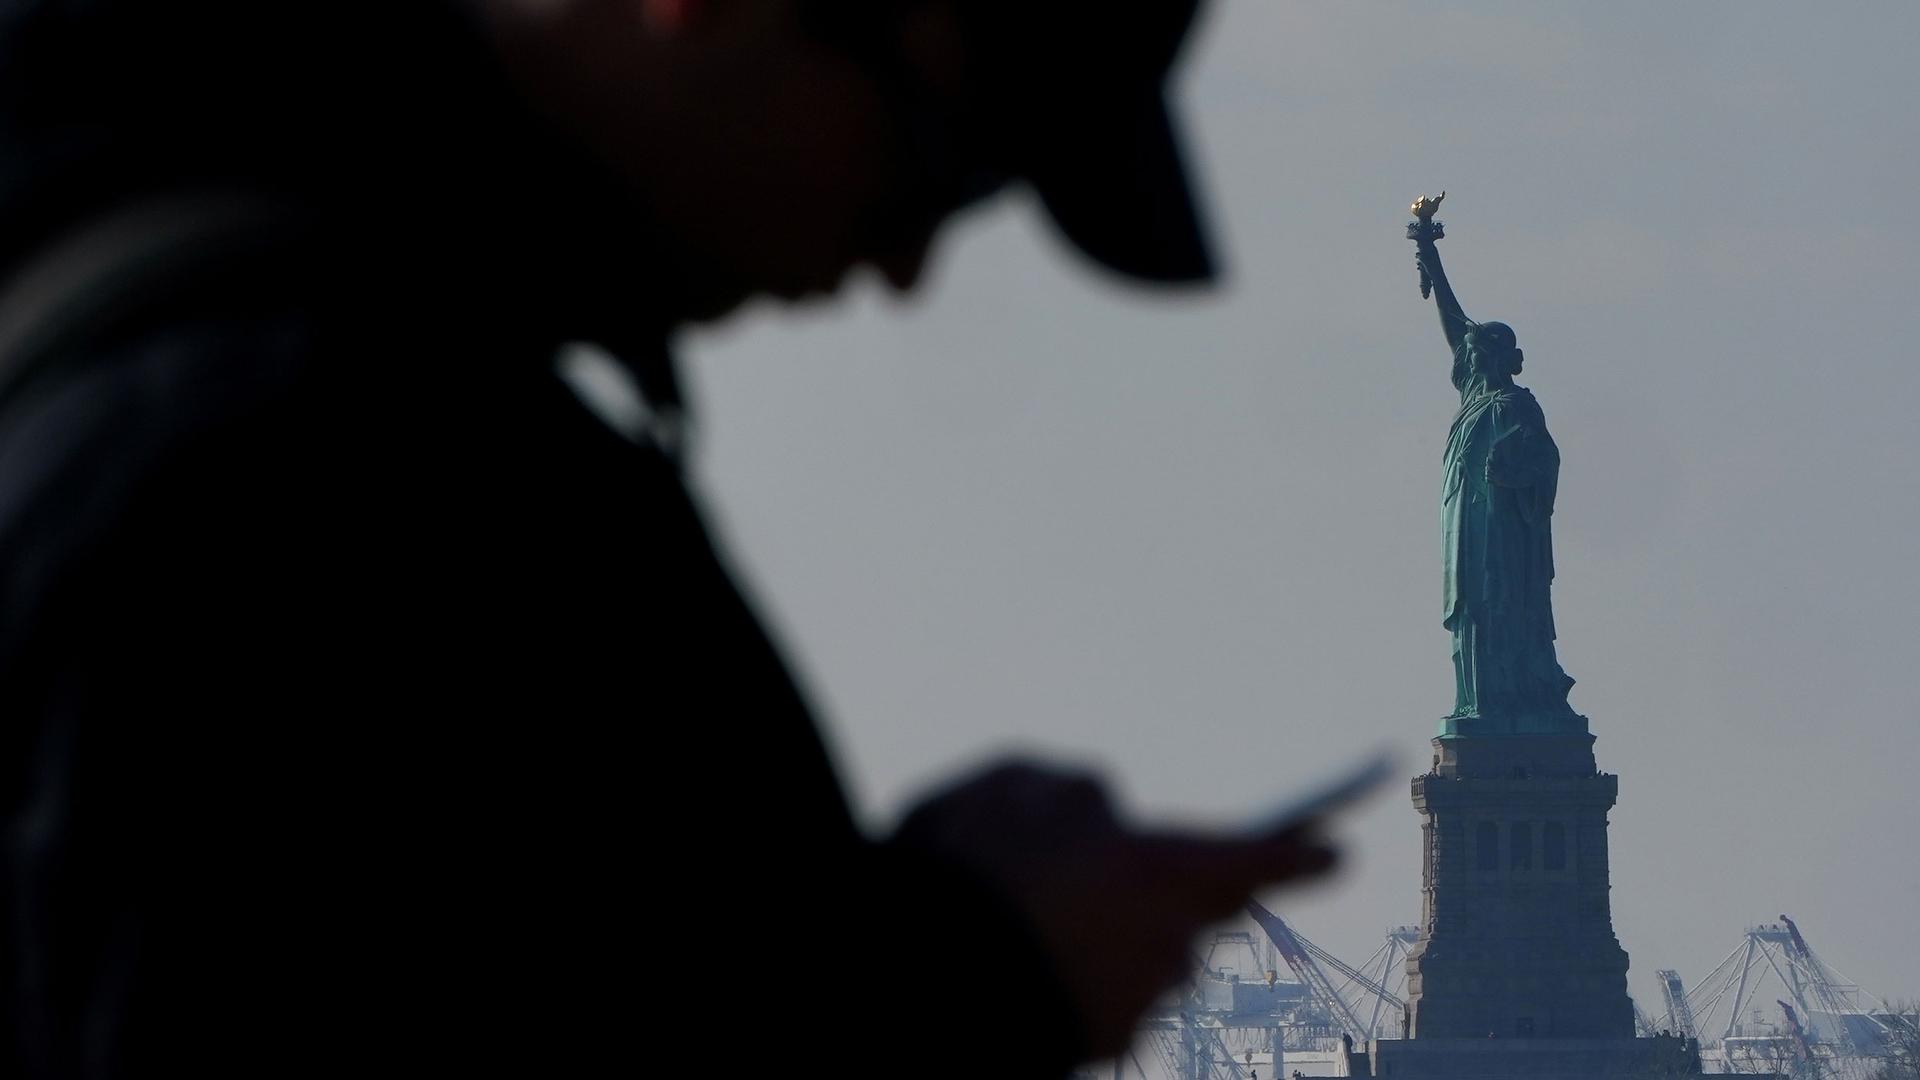 A man is shown in shadown hearing a hat and looking at a mobile phone with the Statue of Liberty in the background.